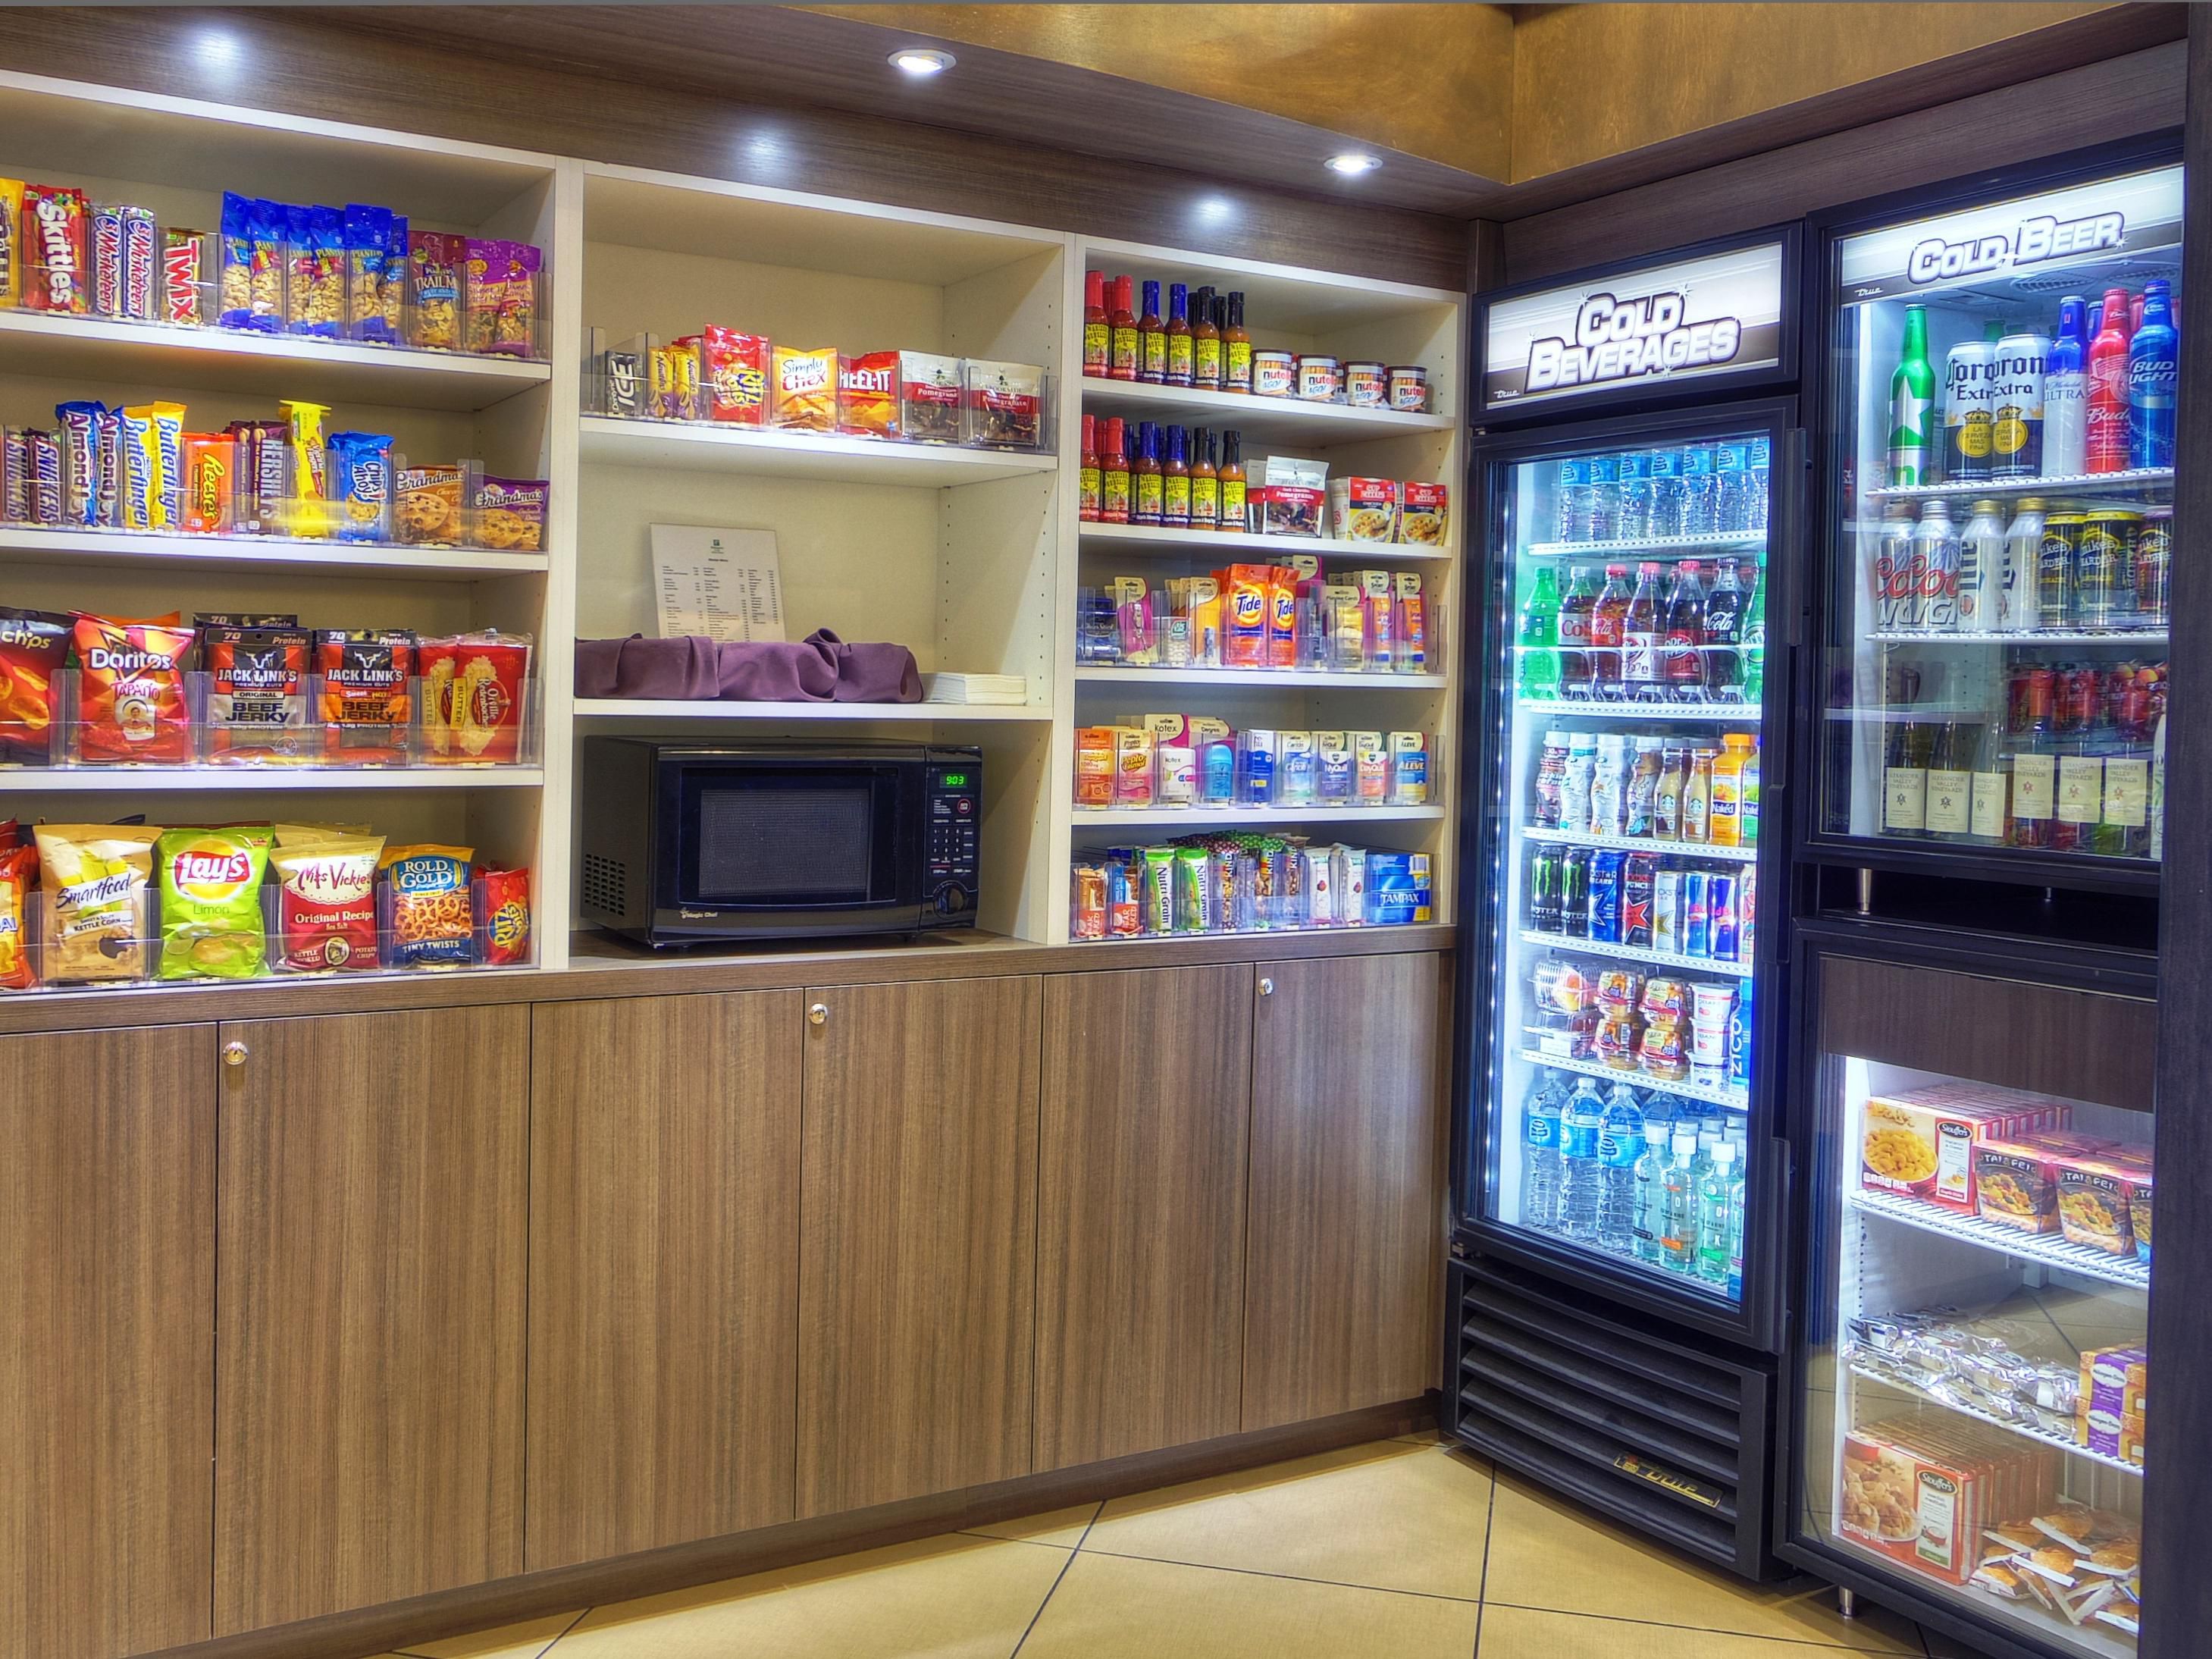 Our hotel offers a fully stocked sundries shop with drinks, snacks, and toiletries in case you forgot to pack yours.   